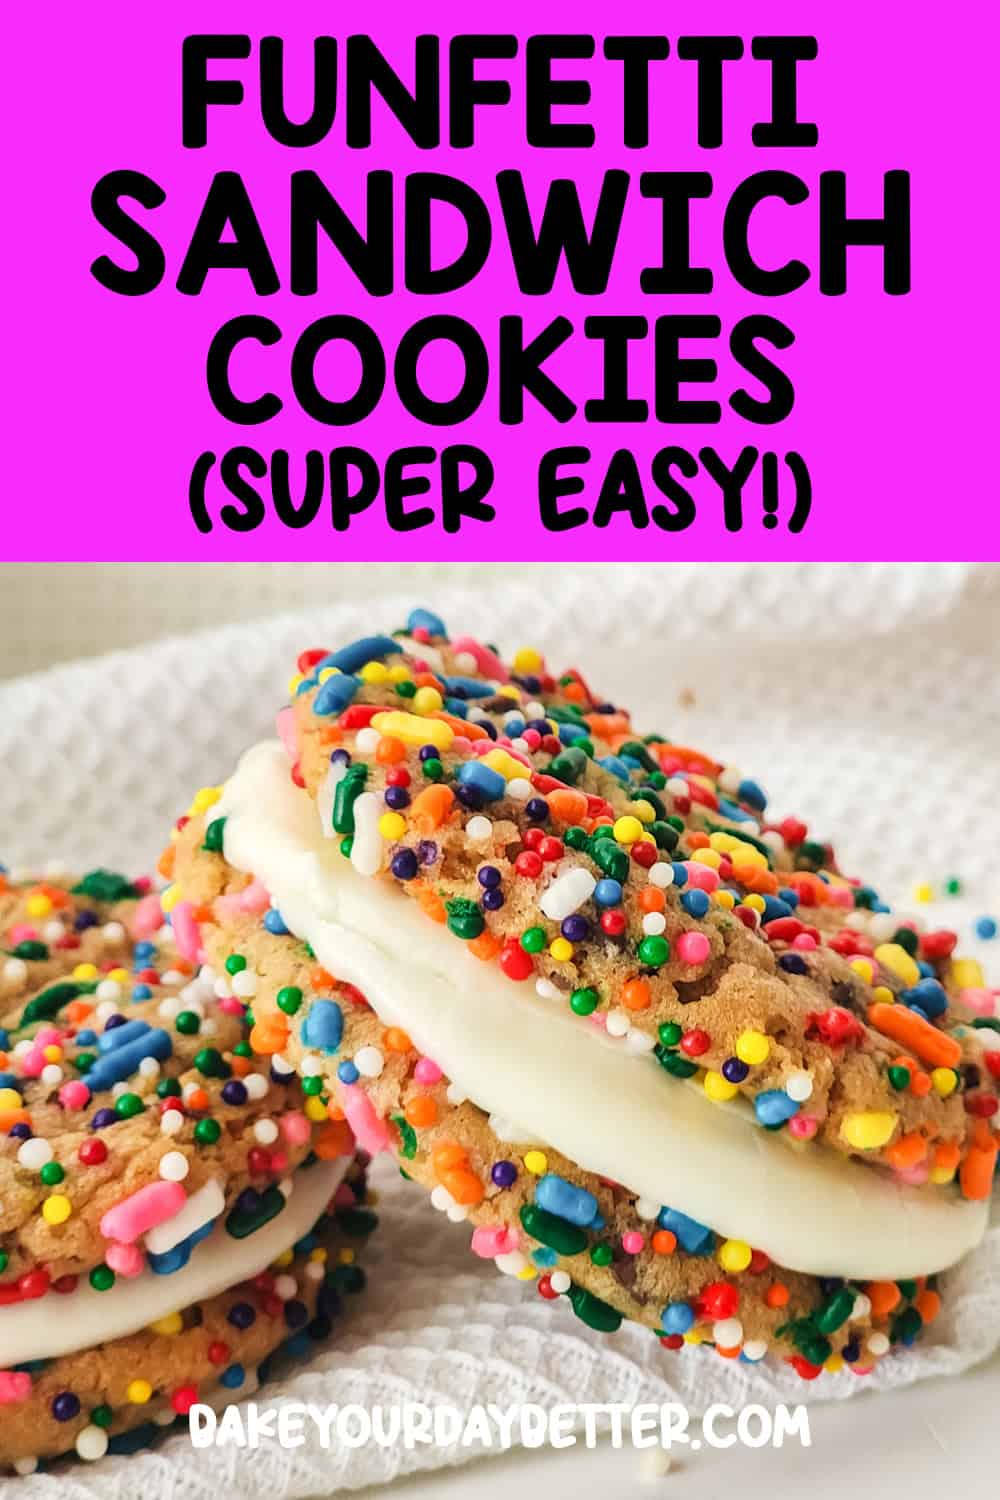 picture of funfetti sandwich cookies with text overlay that says: funfetti sandwich cookies (super easy!)